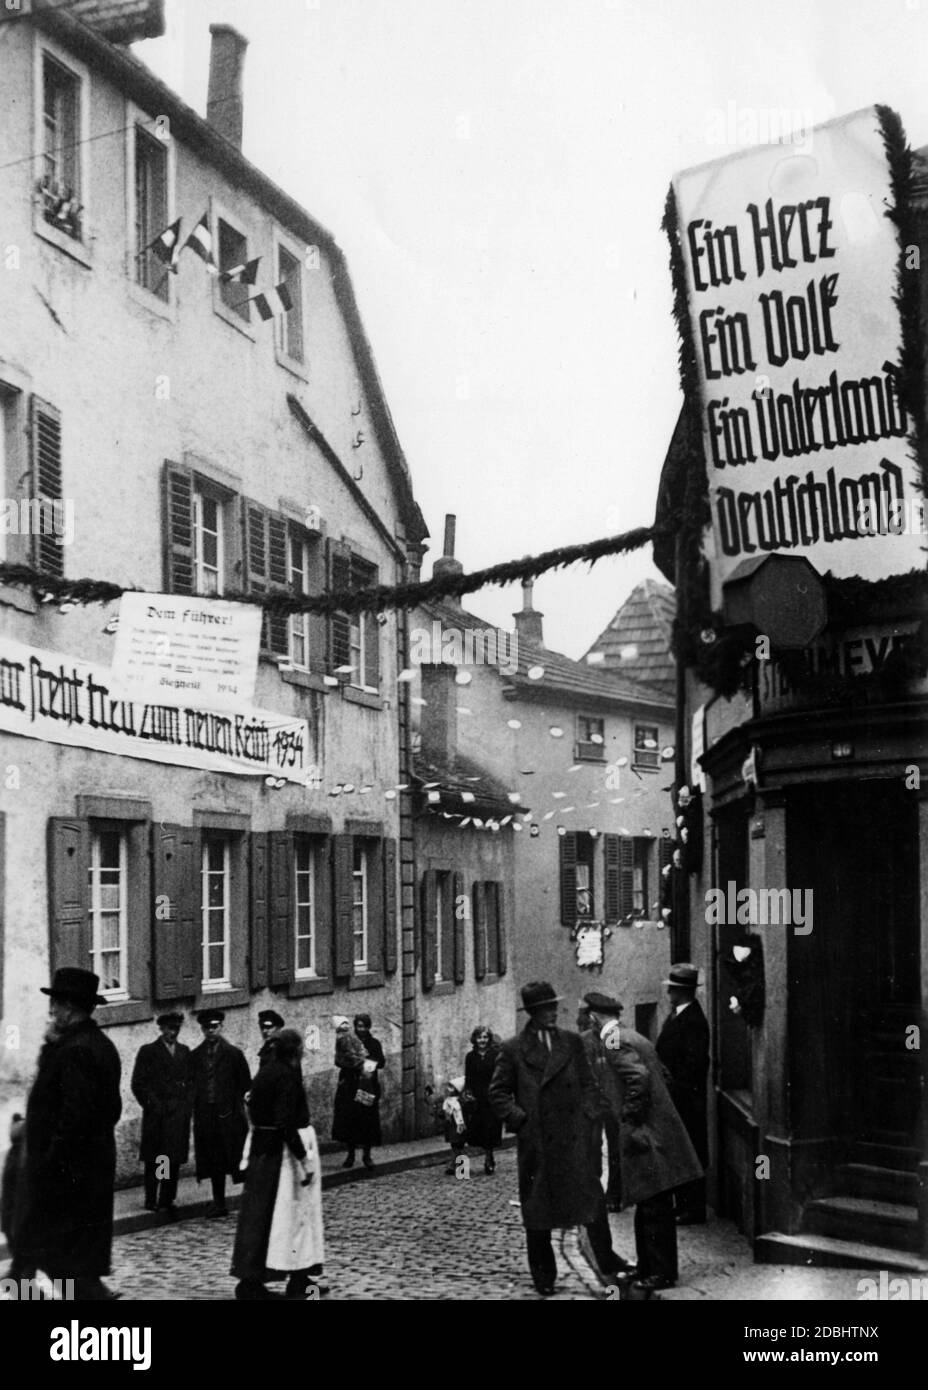 'The Altneugasse of Saarbruecken is festively decorated with swastika flags, imperial flags and banners to celebrate the first anniversary of the ''seizure of power''. Left: ''Saar strives faithfully to the new Reich 1934''. In the middle a text '' To the Fuehrer!''. On the right the slogan: ''One Heart. One Nation. One Fatherland. Germany''.' Stock Photo